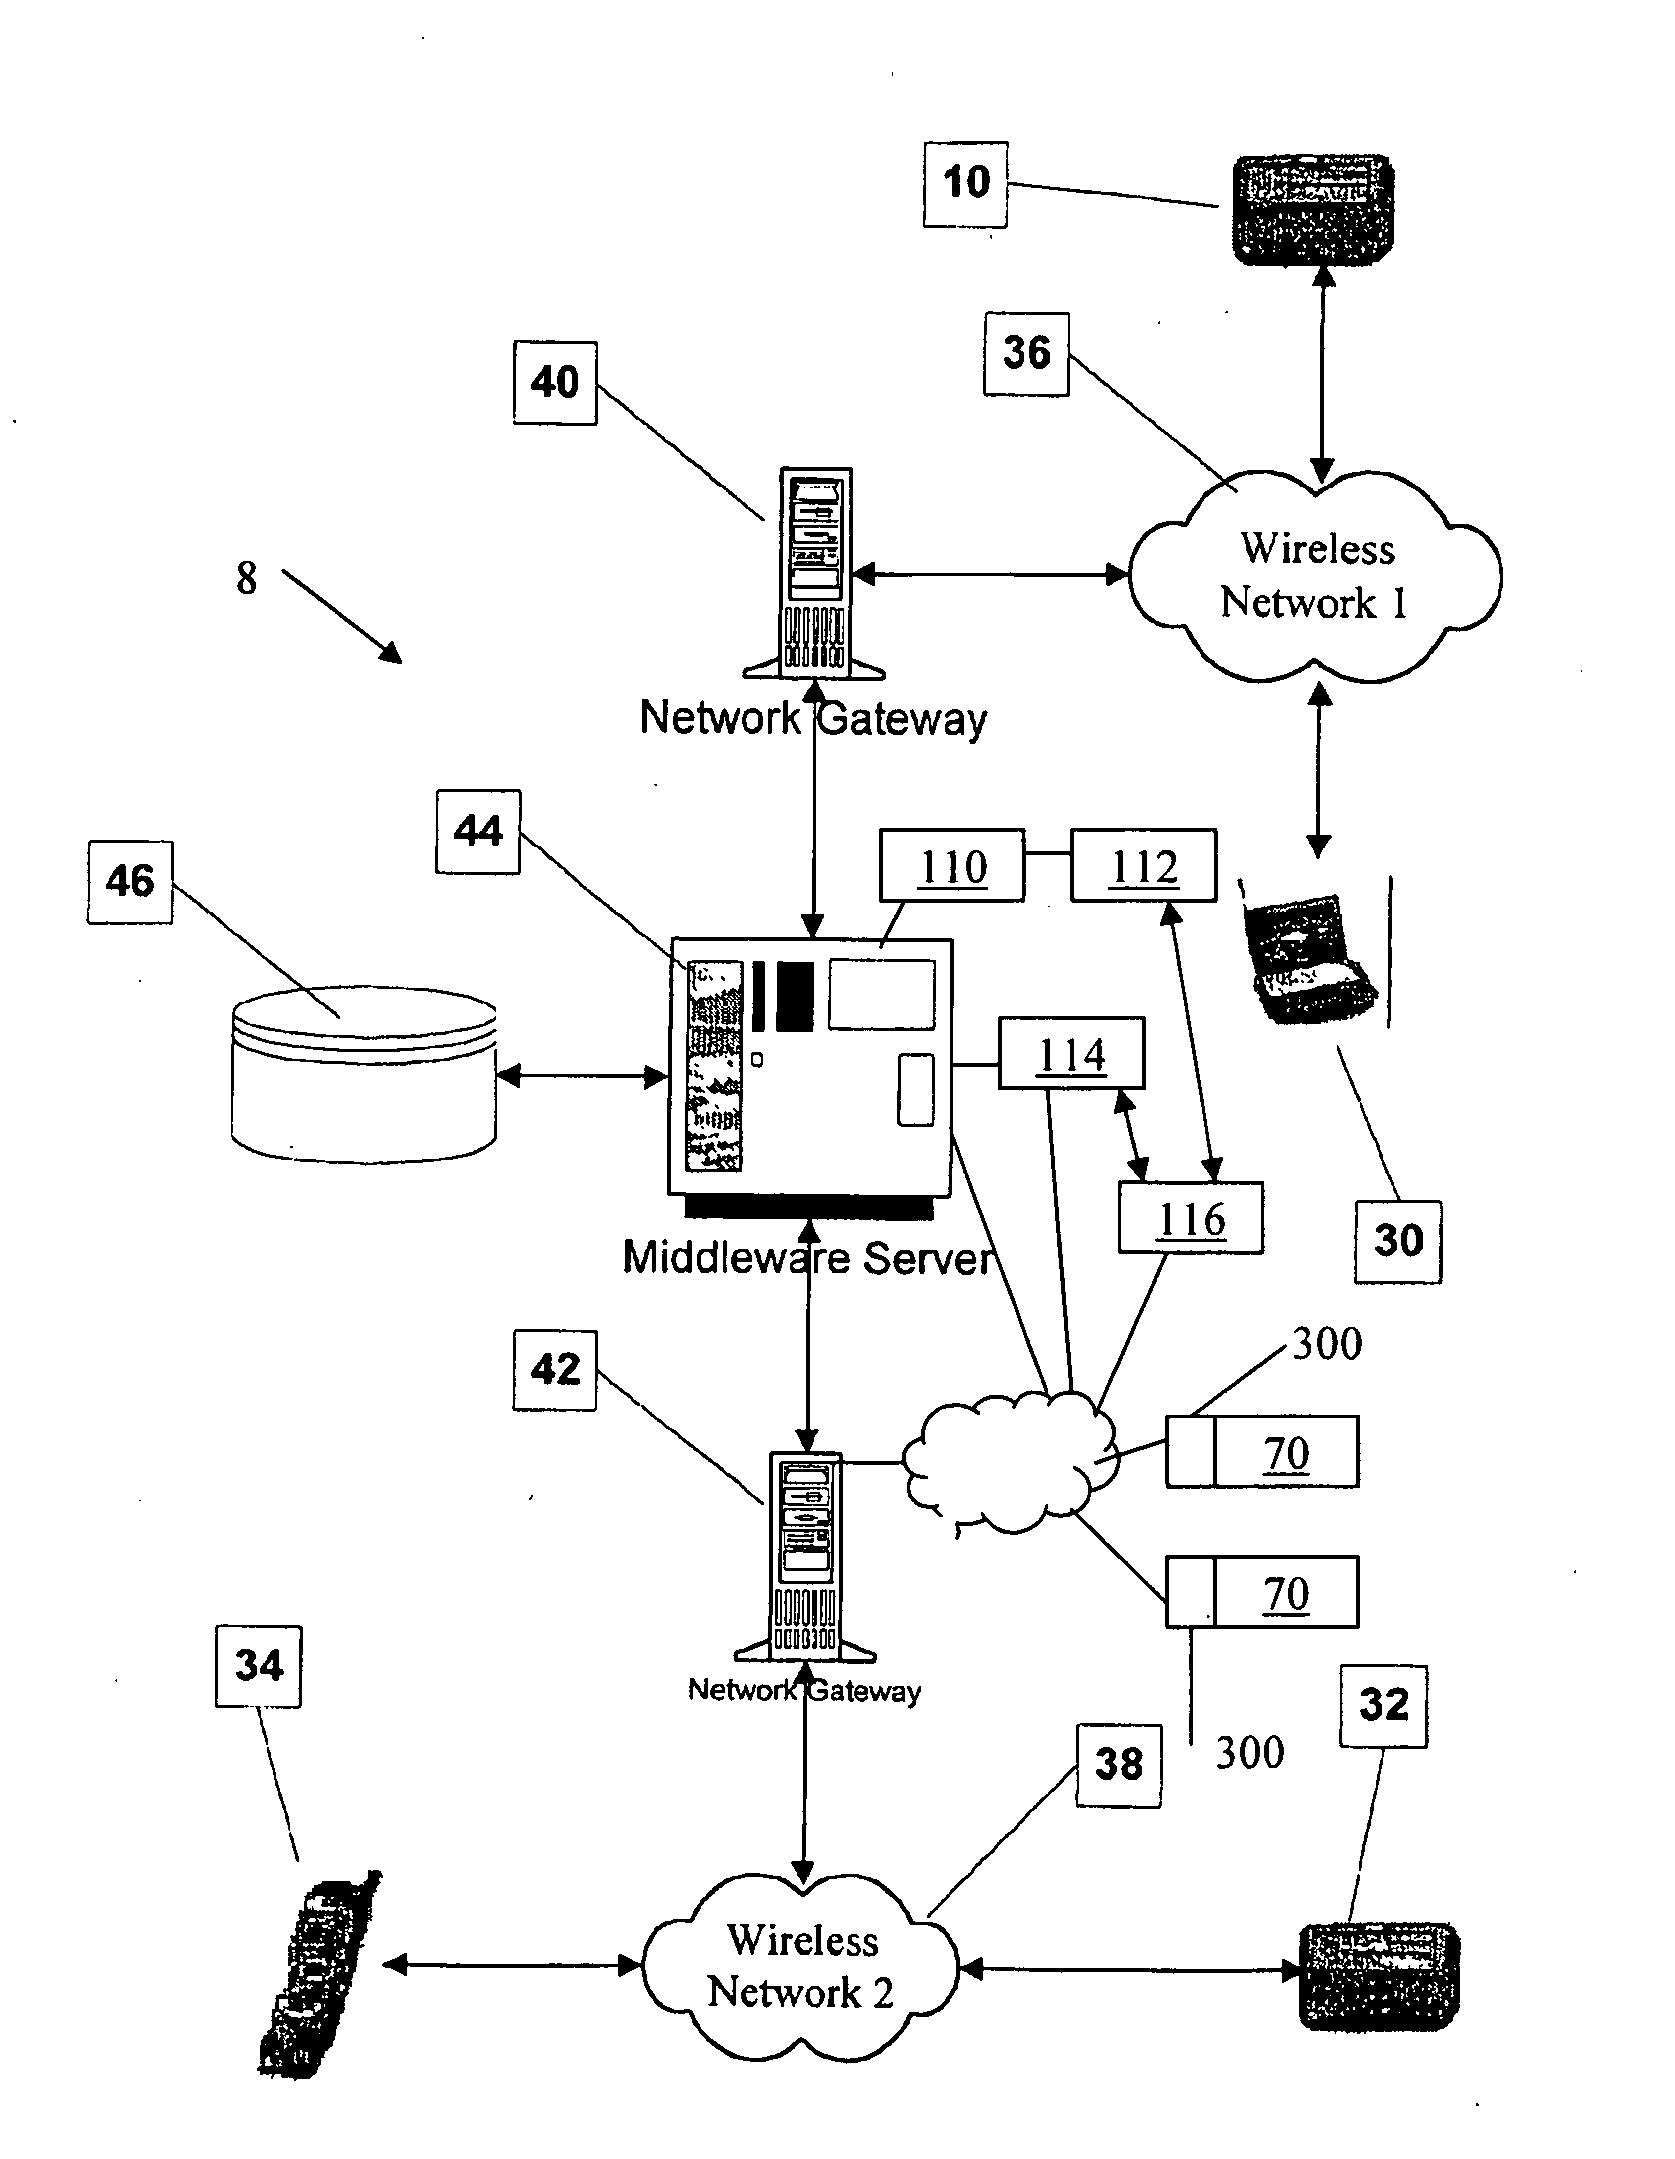 System and Method For Developing An Application For Extending Access to Local Software Of A Wireless Device